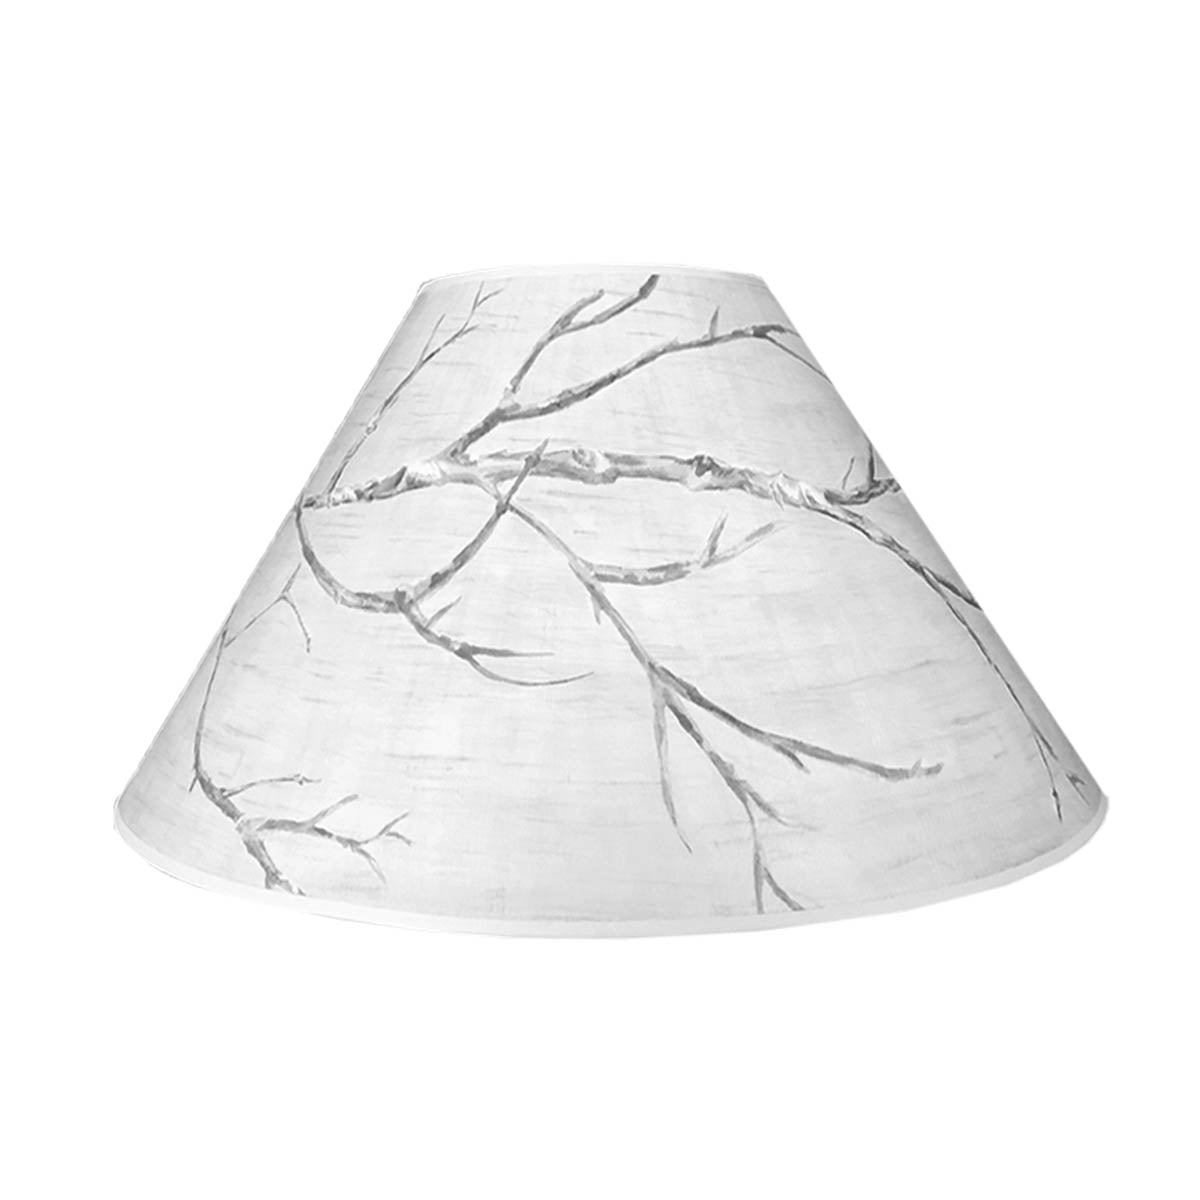 Janna Ugone &amp; Co Lamp Shades Medium Conical Lamp Shade in Sweeping Branch